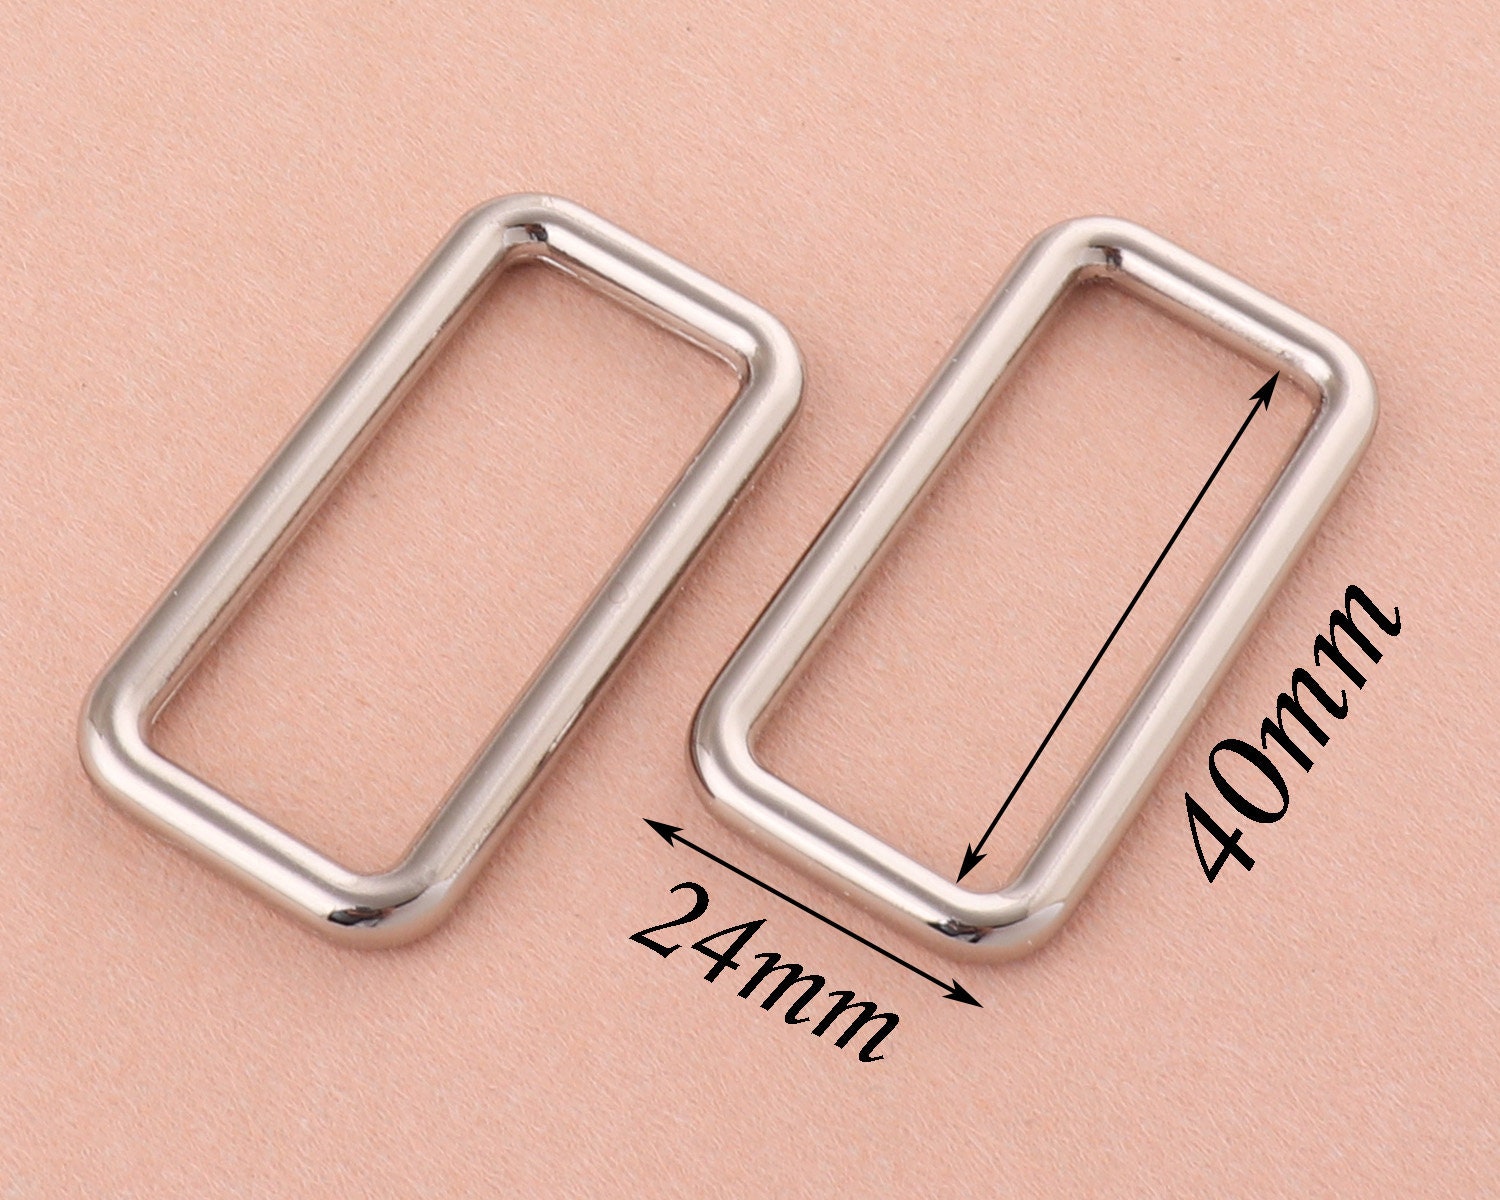 Buy Wholesale China 40mm Metal Rectangle Rings Webbing Buckles For Straps,  Bags, Purses, Belting, Ribbon & Metal Rectangle Rings Webbing Buckles at  USD 0.03